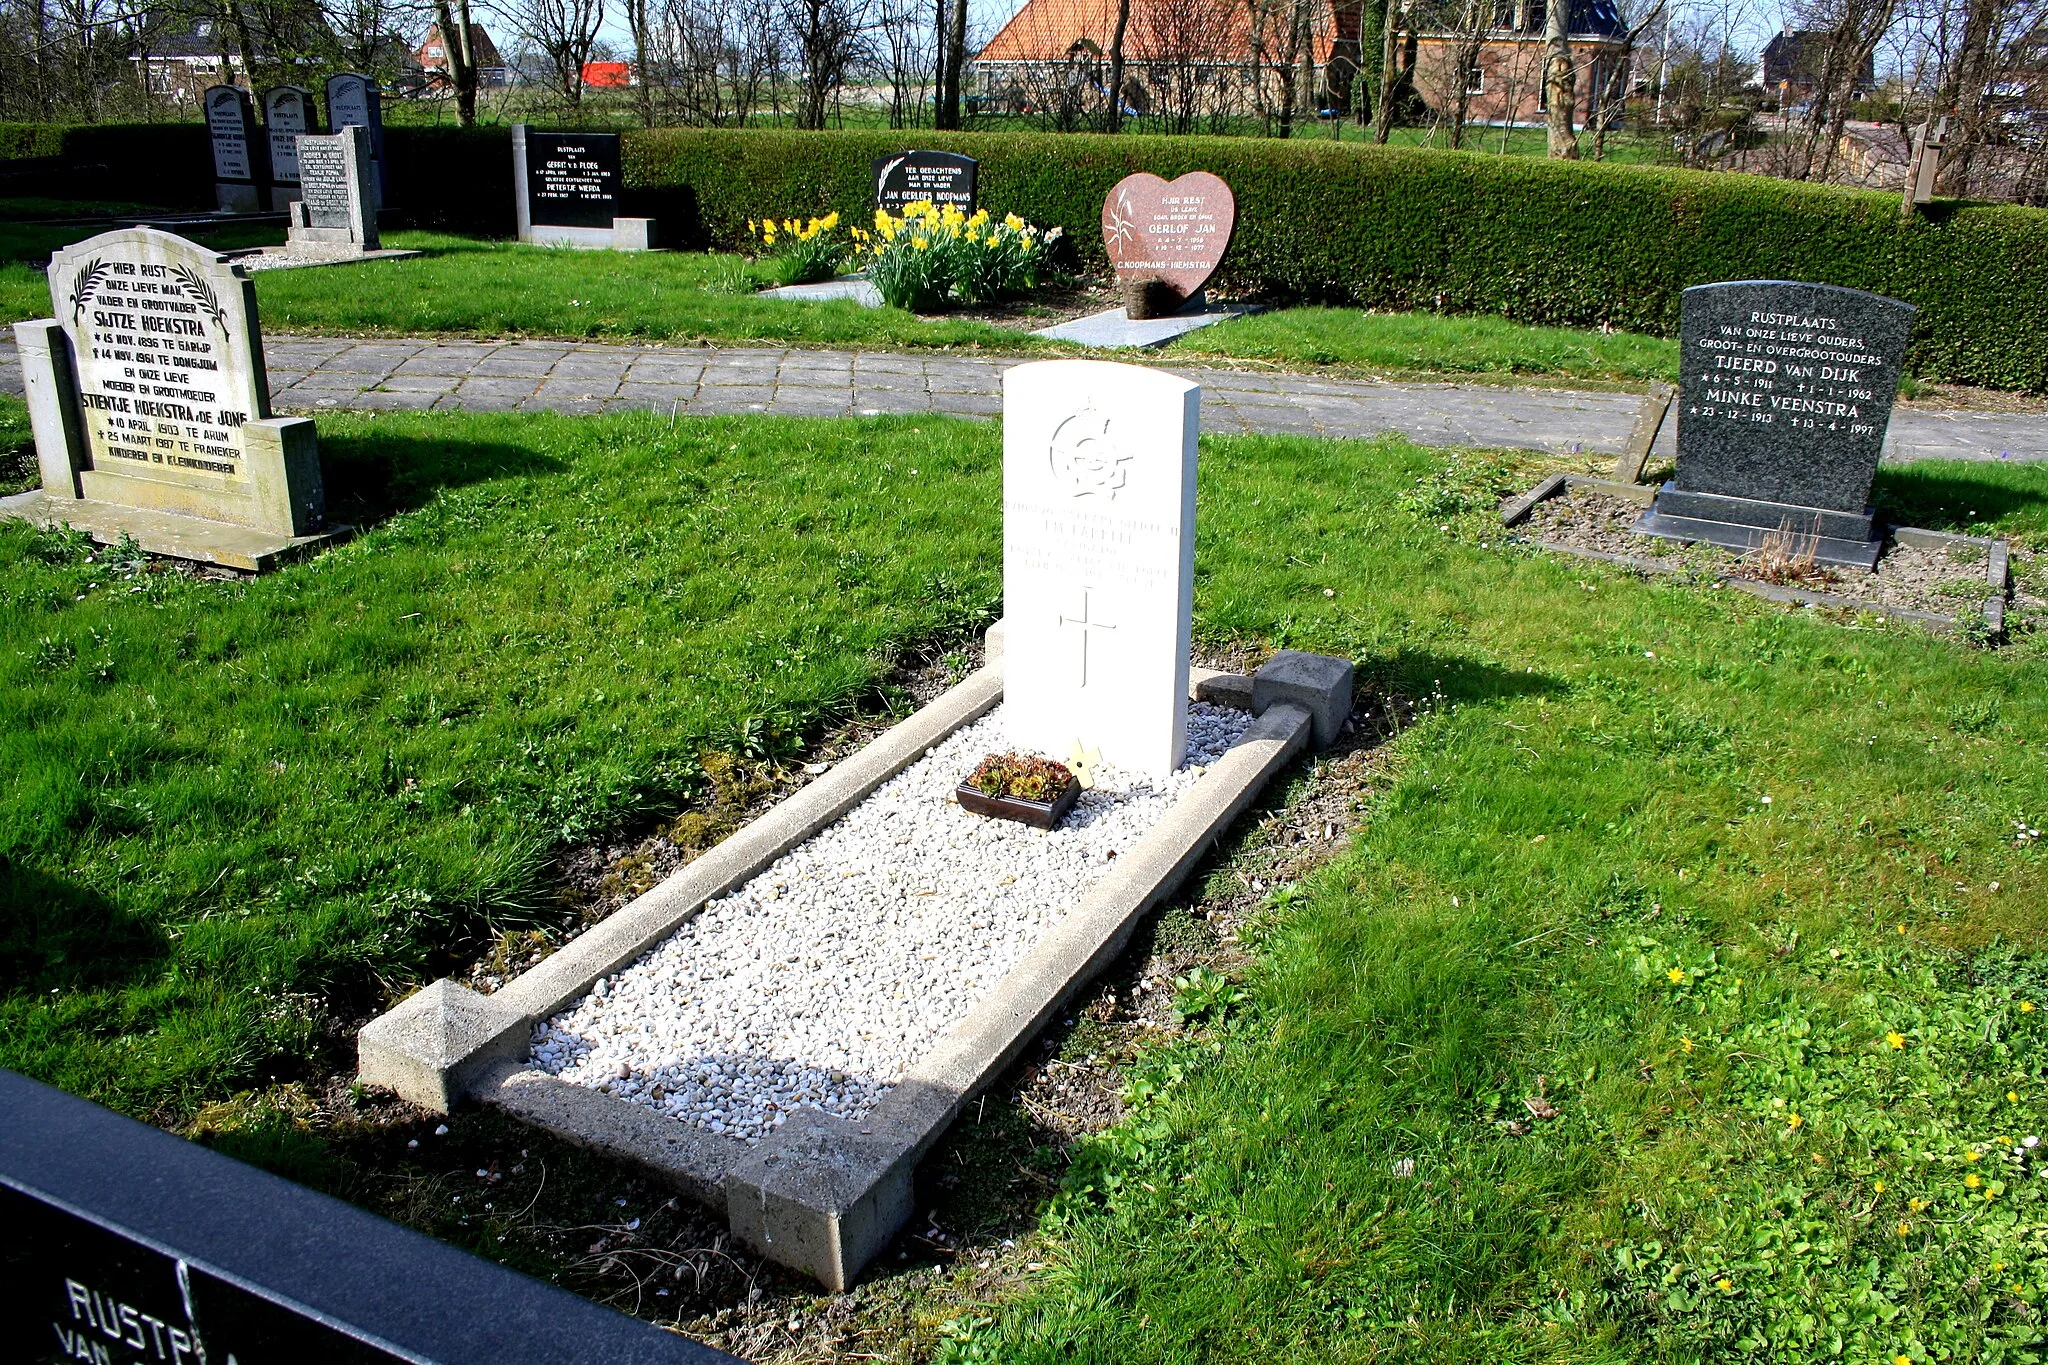 Photo showing: Commonwealth War Grave in the Protestant cemetery in Dongjum, Friesland, the Netherlands, for Warrant Officer Class II JOHN MILLER FARRELL, RCAF. He was a navigator in 78 Squadron RAF, and died on 14 May 1943.